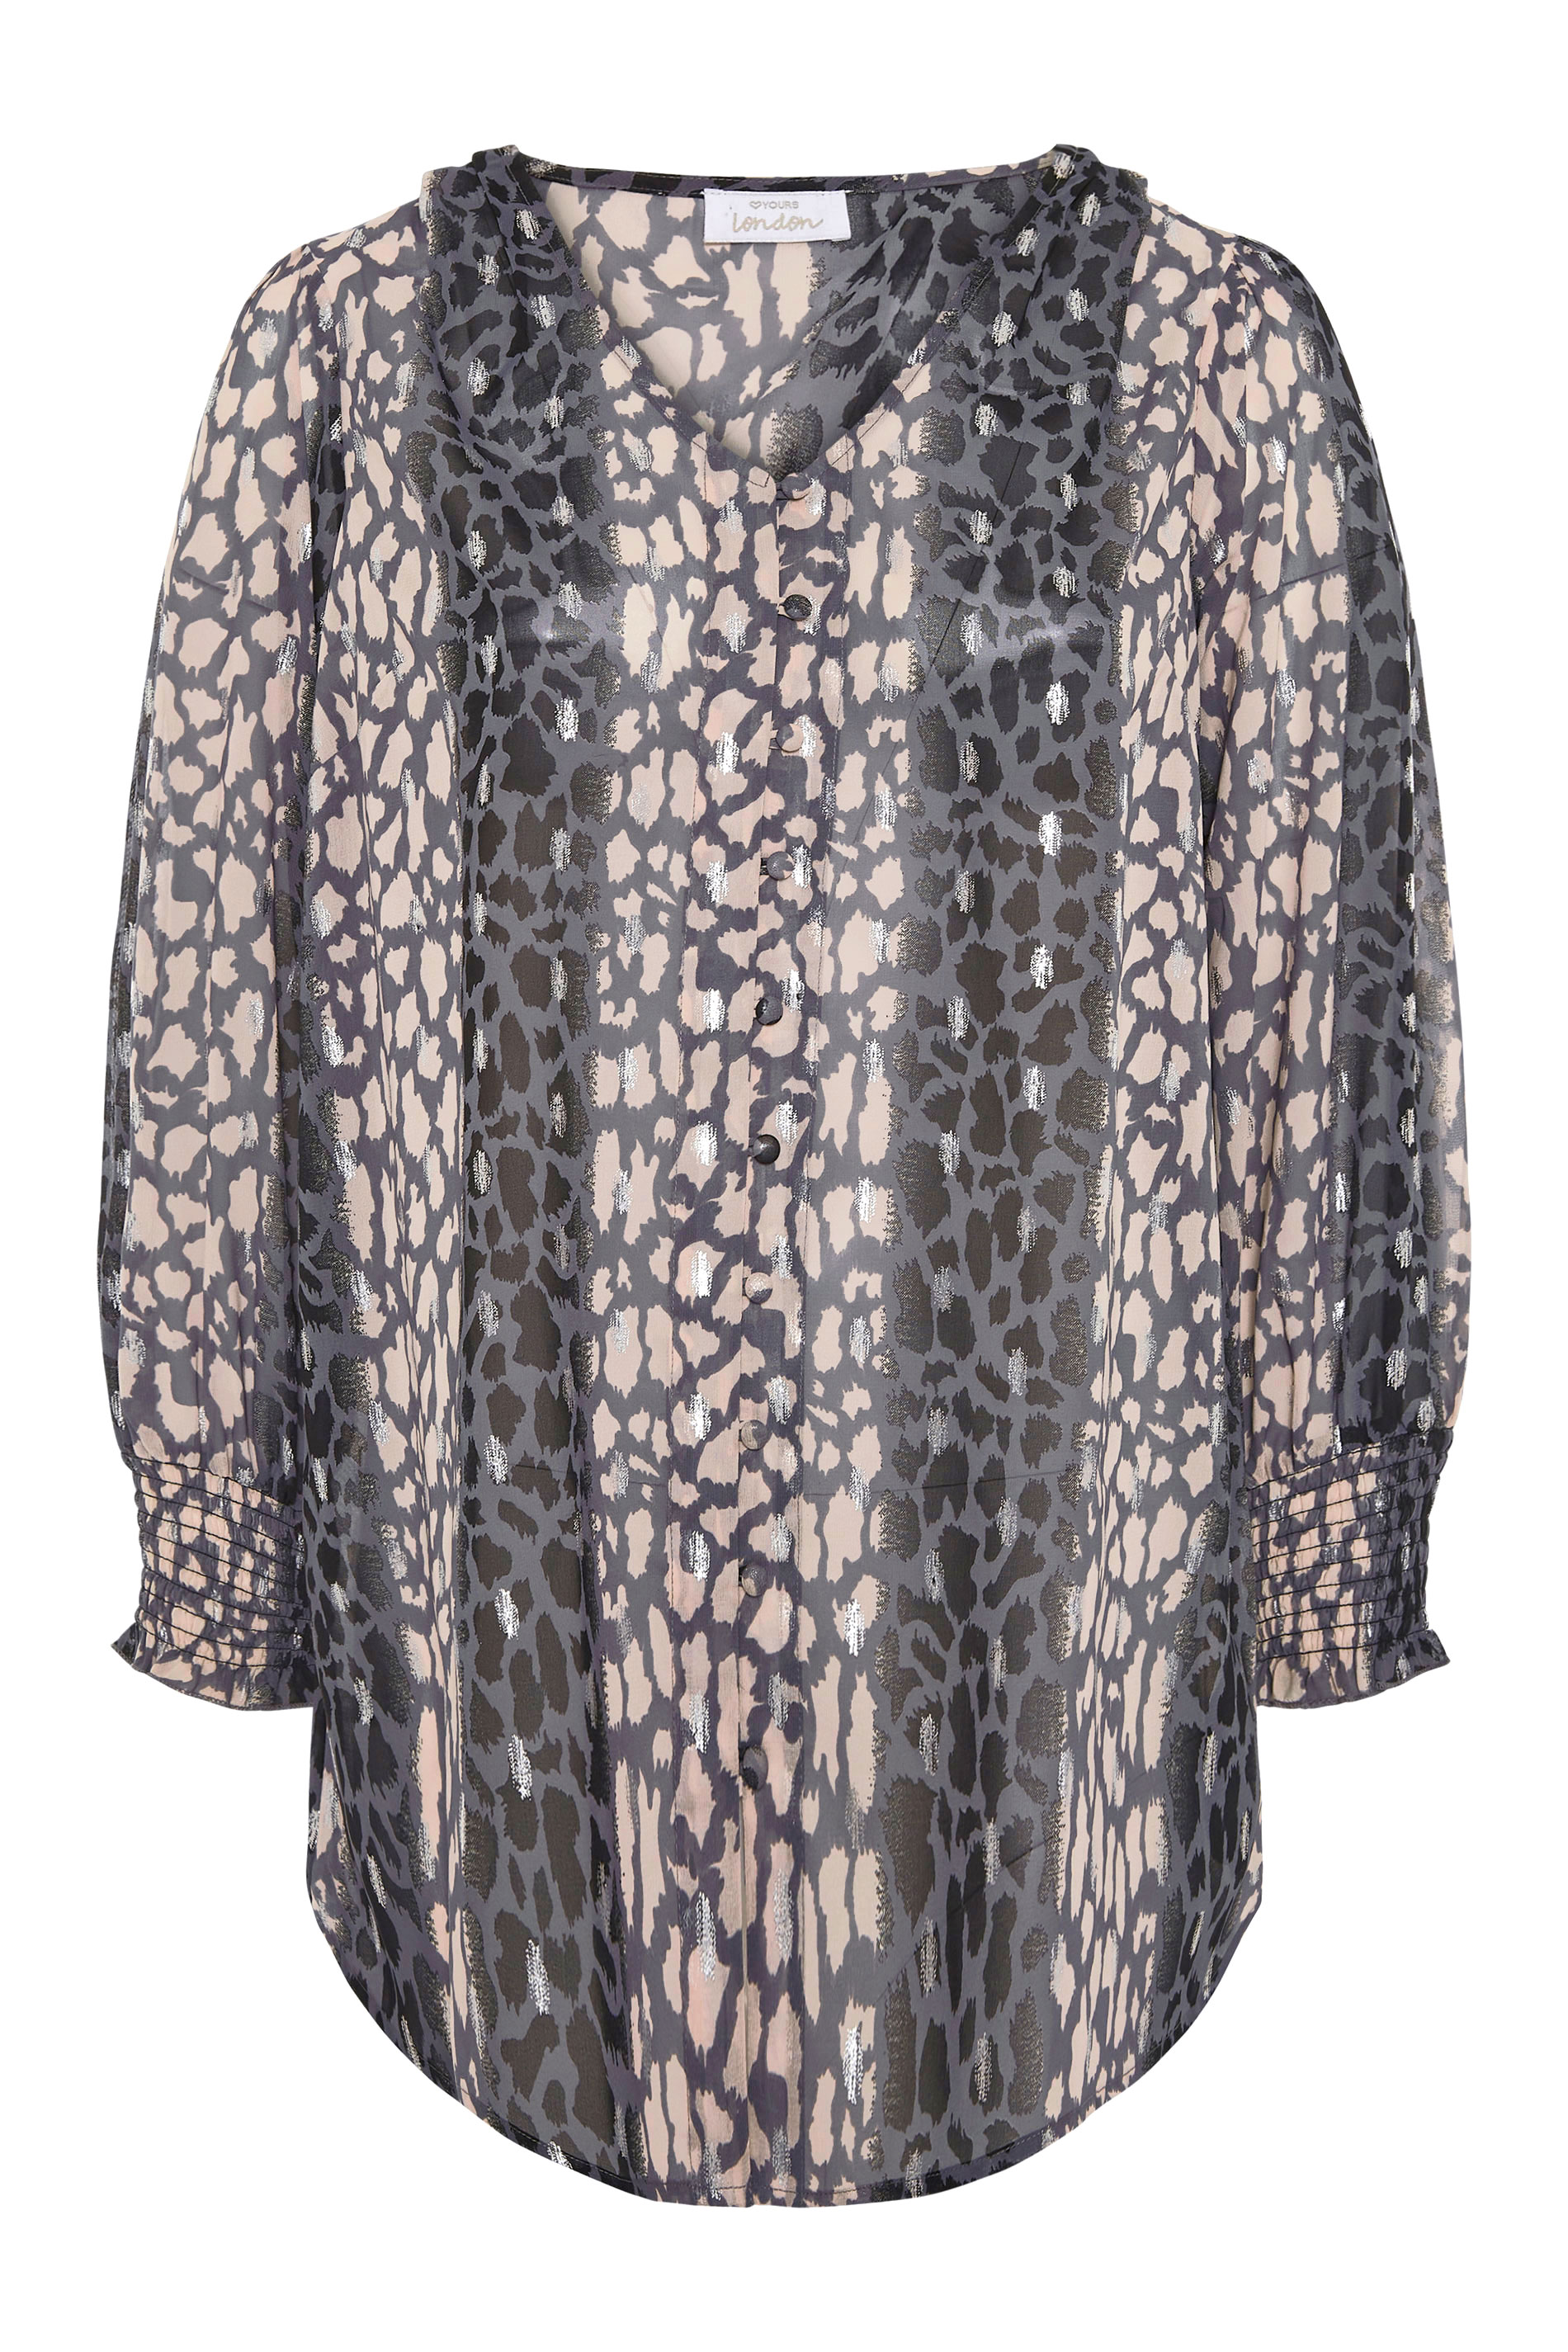 Plus Size YOURS LONDON Grey Animal Print Balloon Sleeve Blouse | Yours ...